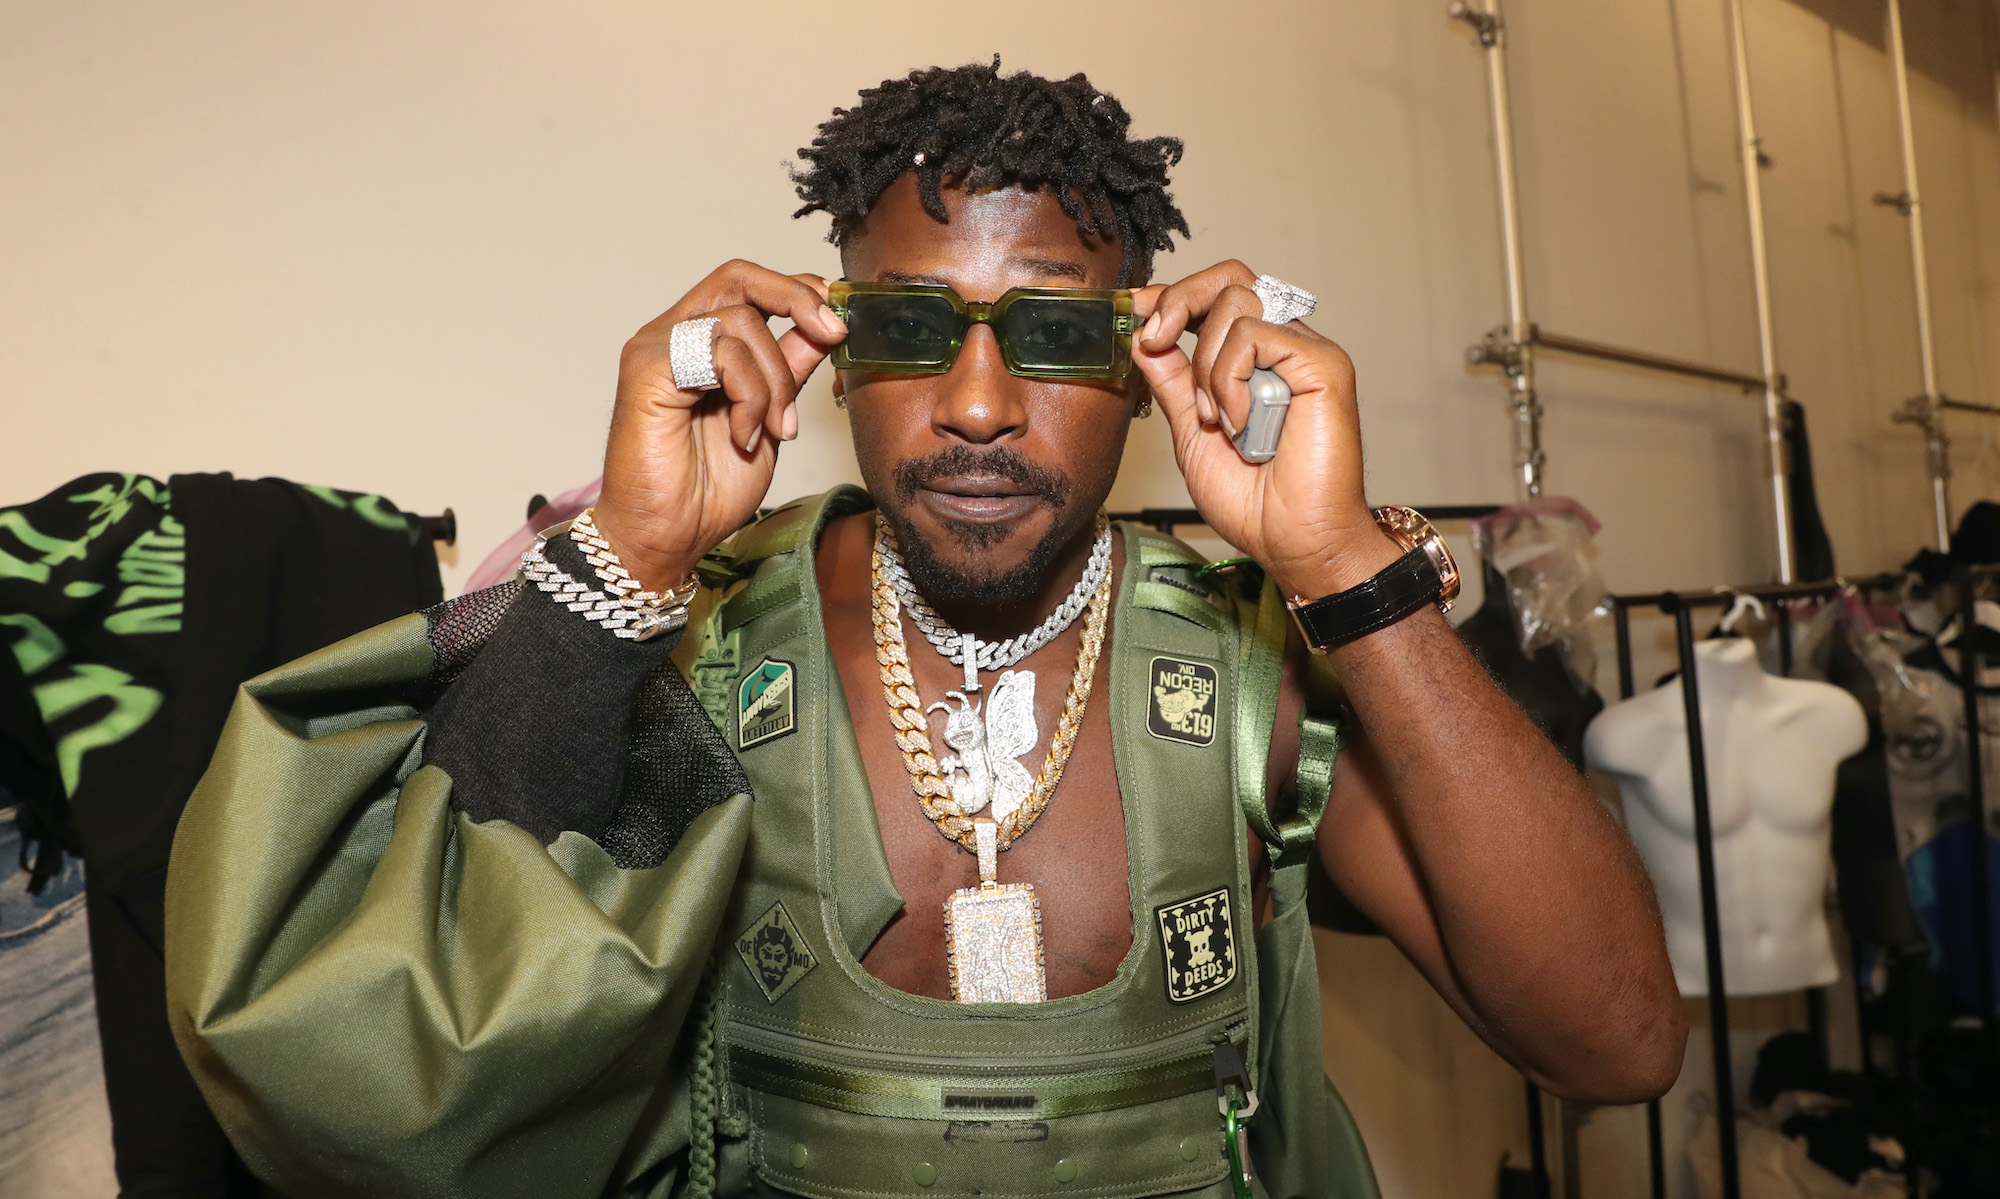 Antonio "AB" Brown poses during SprayGround 2022 Pop Up Fashion Show at Times Square on September 08, 2022 in New York City.